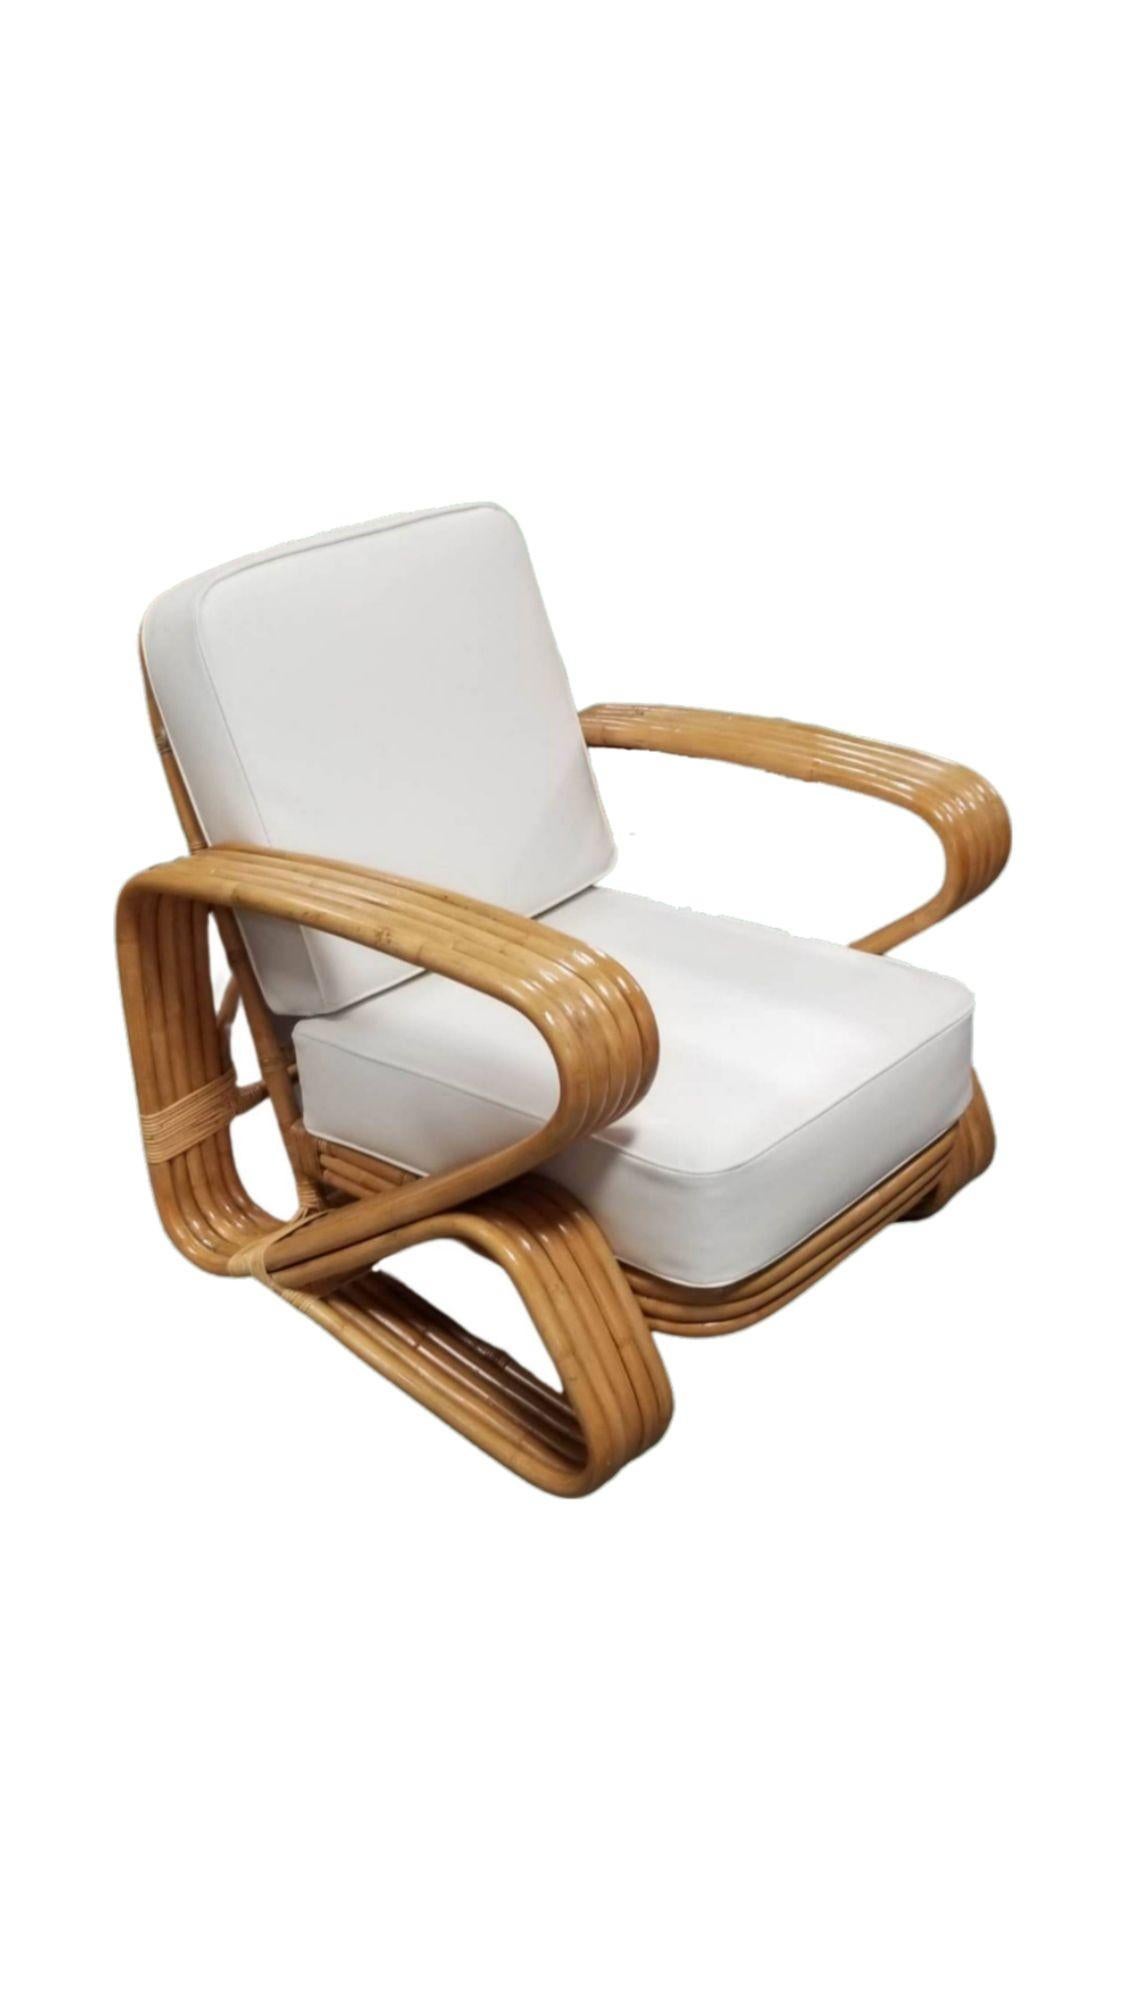 Rare Five-strand 'Double Triangle' lounge chair with a floating seat featuring large oversized arms.

1950, United States

We only purchase and sell only the best and finest rattan furniture made by the best and most well-known American